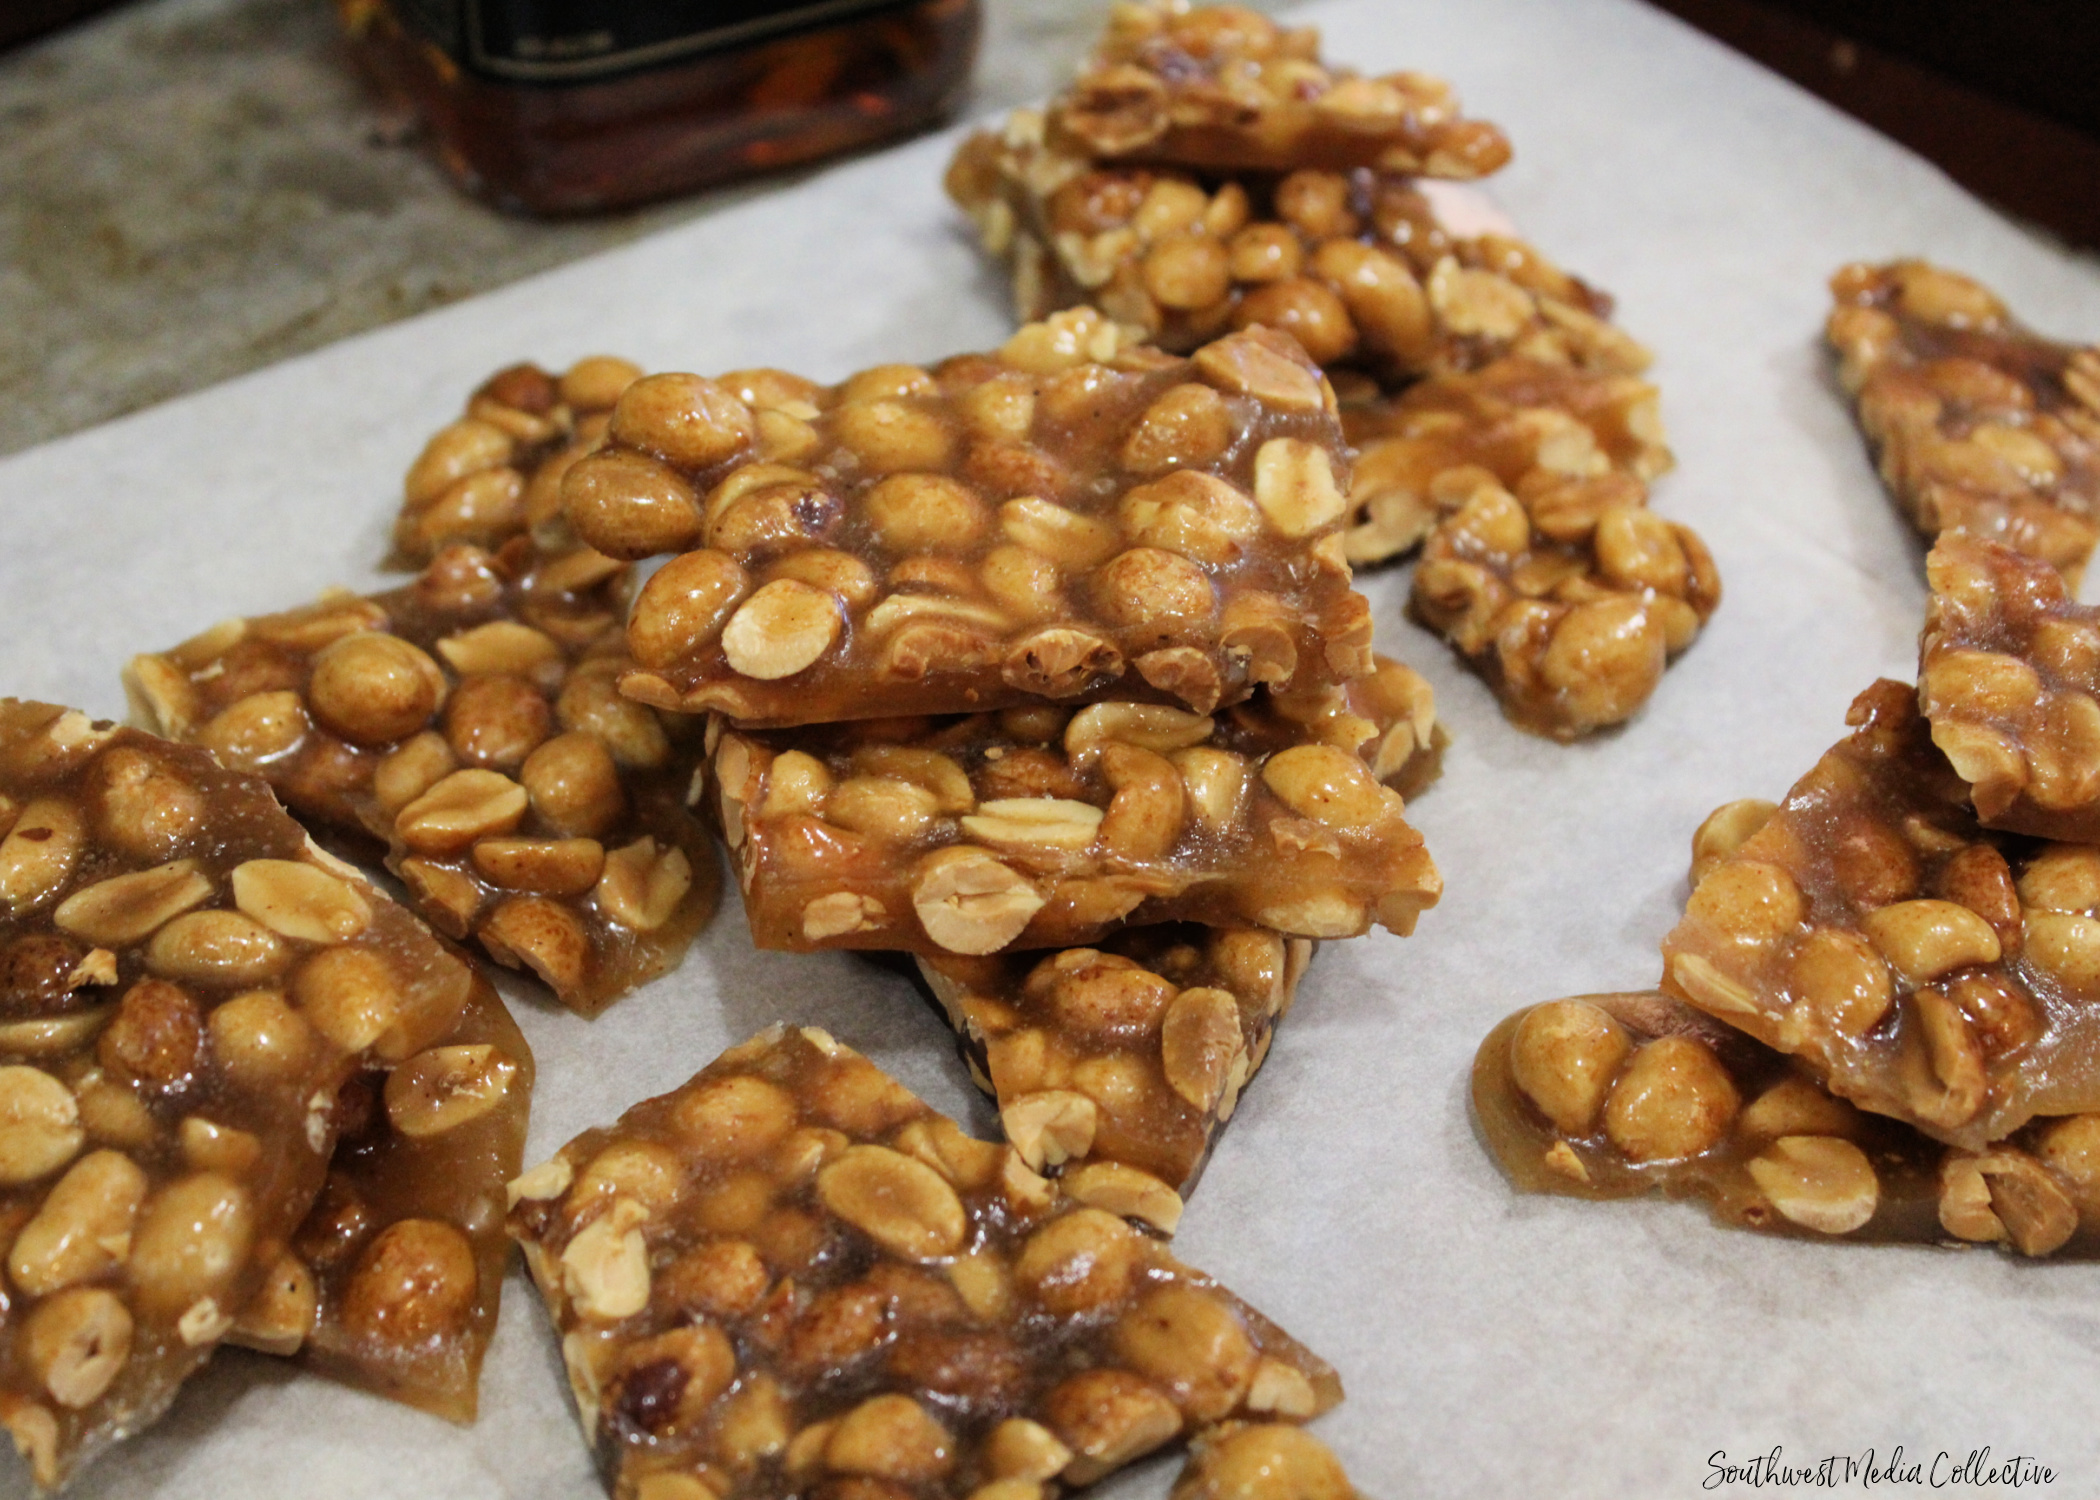 This Bourbon Peanut Brittle is a combination of salty and sweet and a perfect snack to make at the holidays for a party tray that's sure to please!